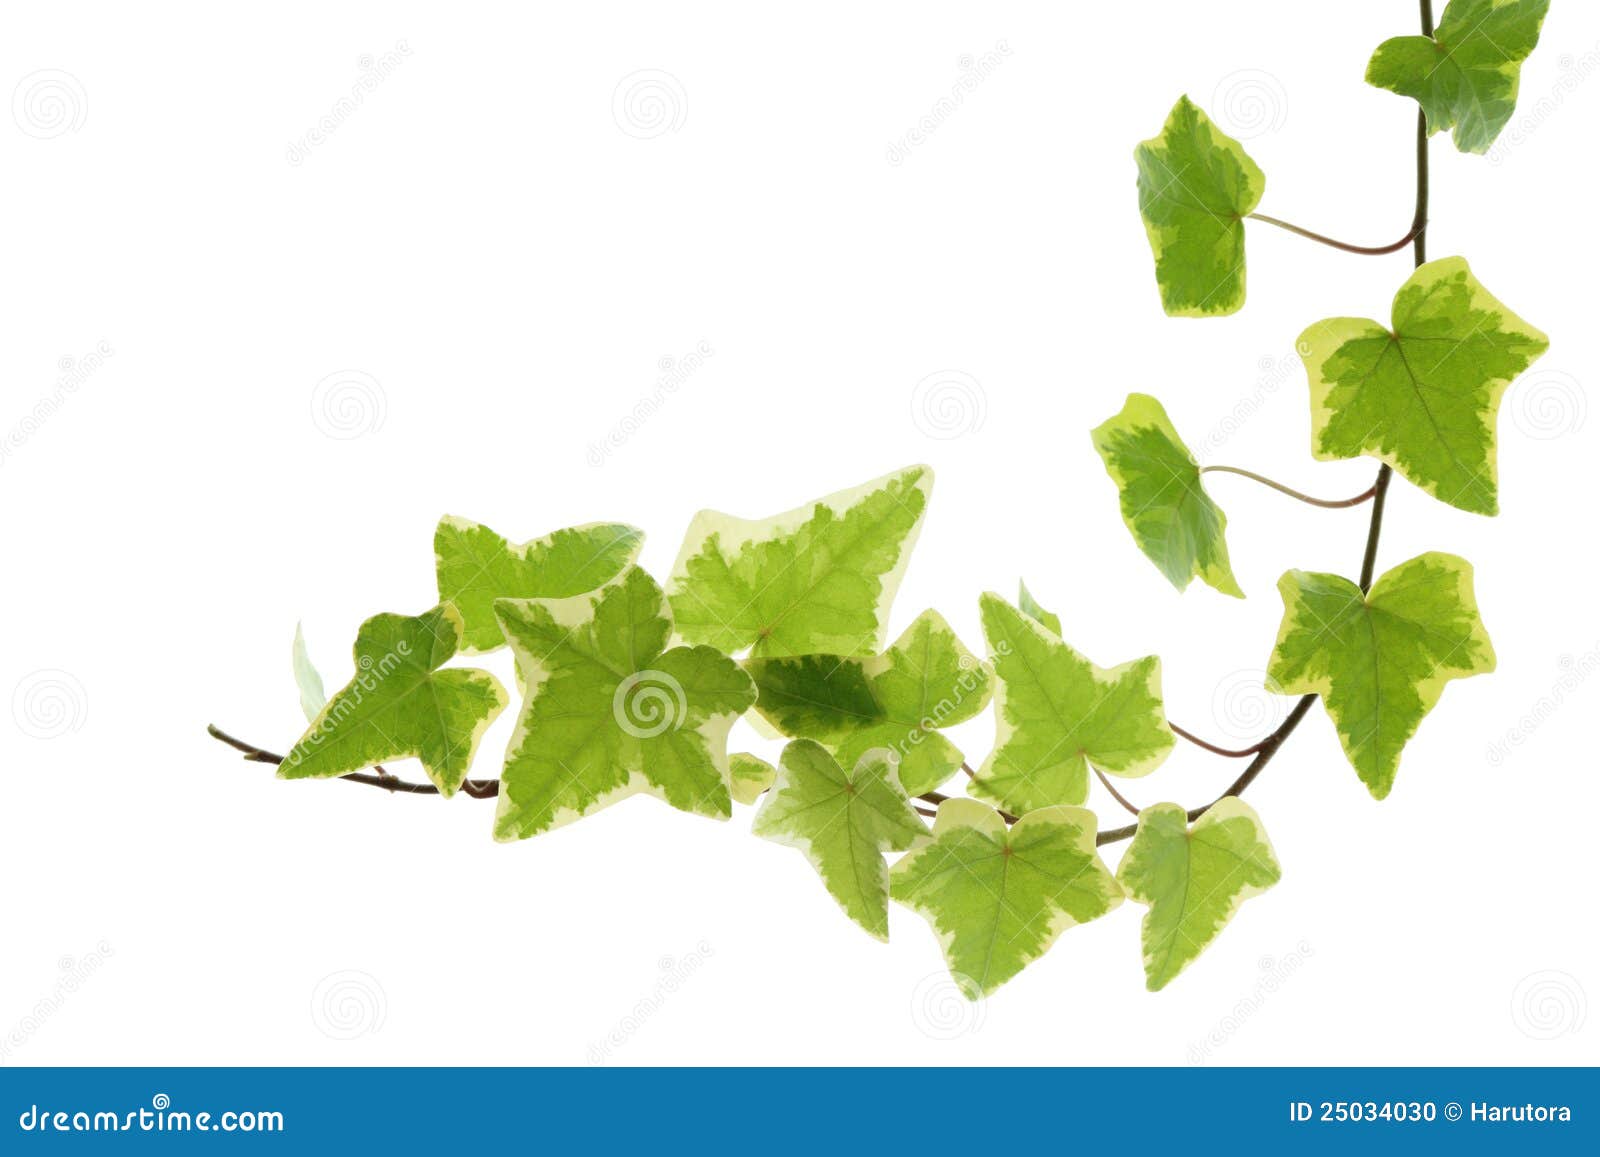 Yellow Green Ivy stock photo. Image of leaves, climber - 25034030